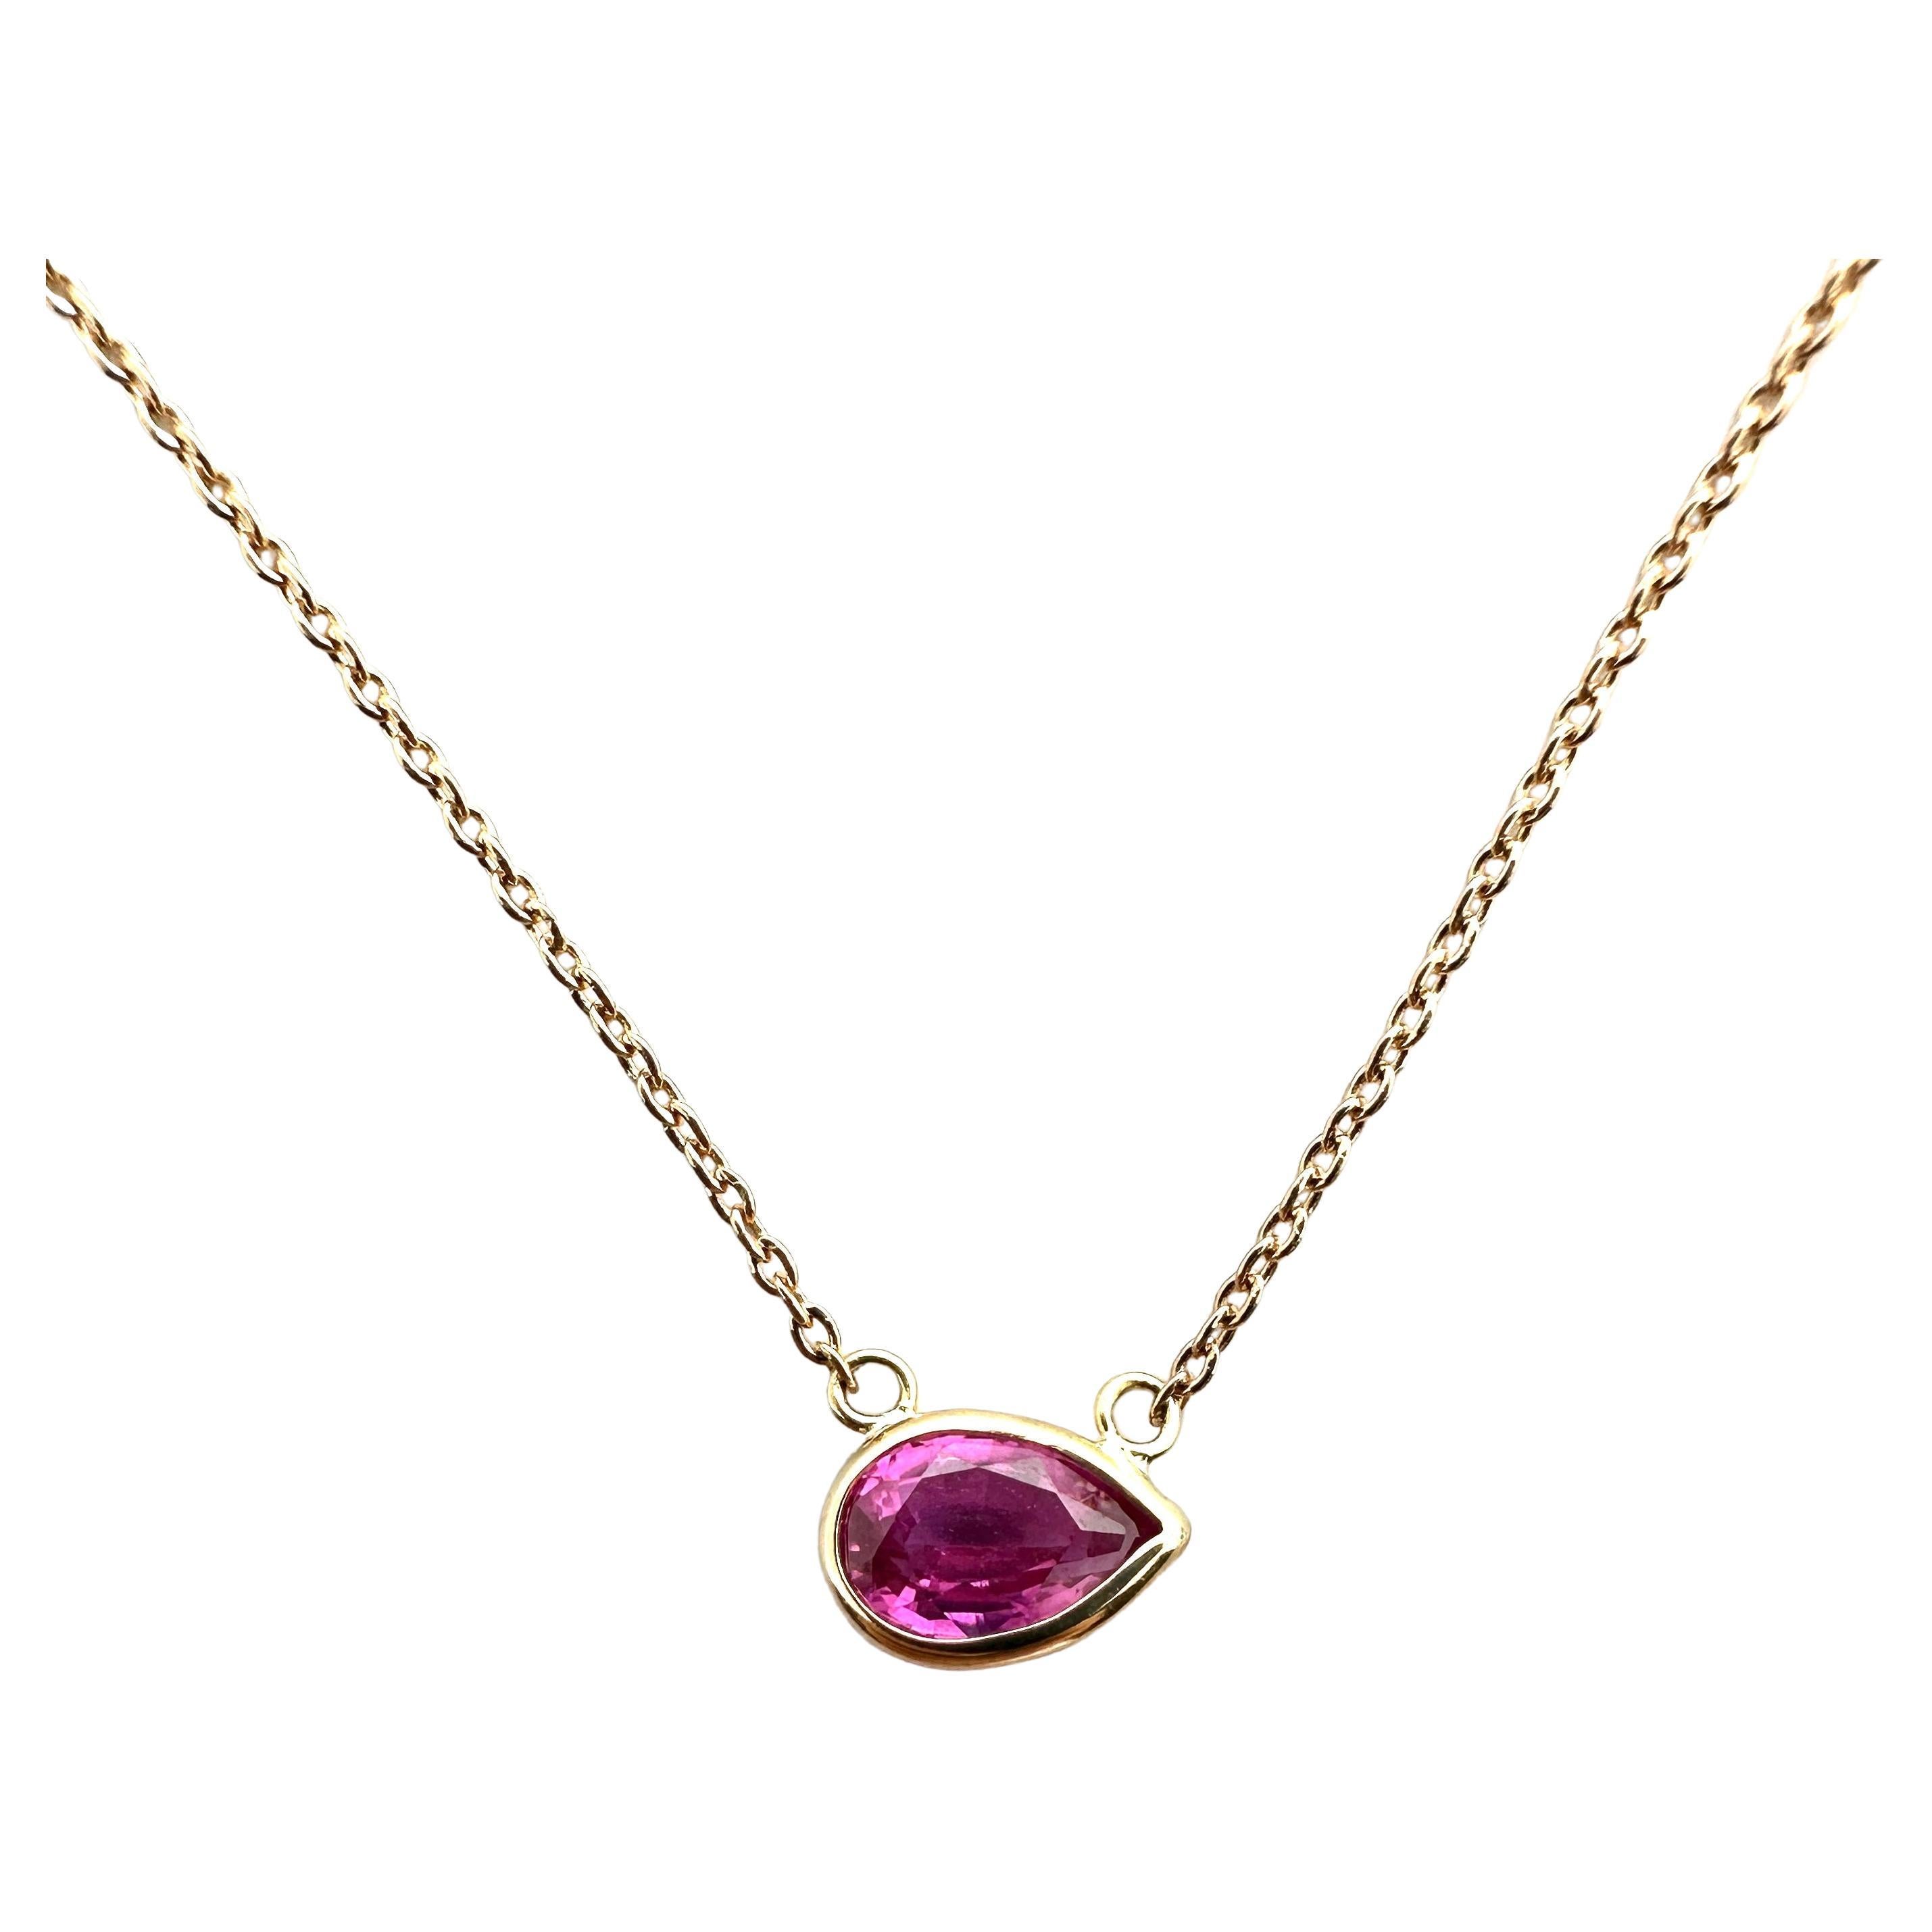 1.17 Ct Certified Pink Sapphire Pear Cut Solitaire Necklace in 14k RG For Sale